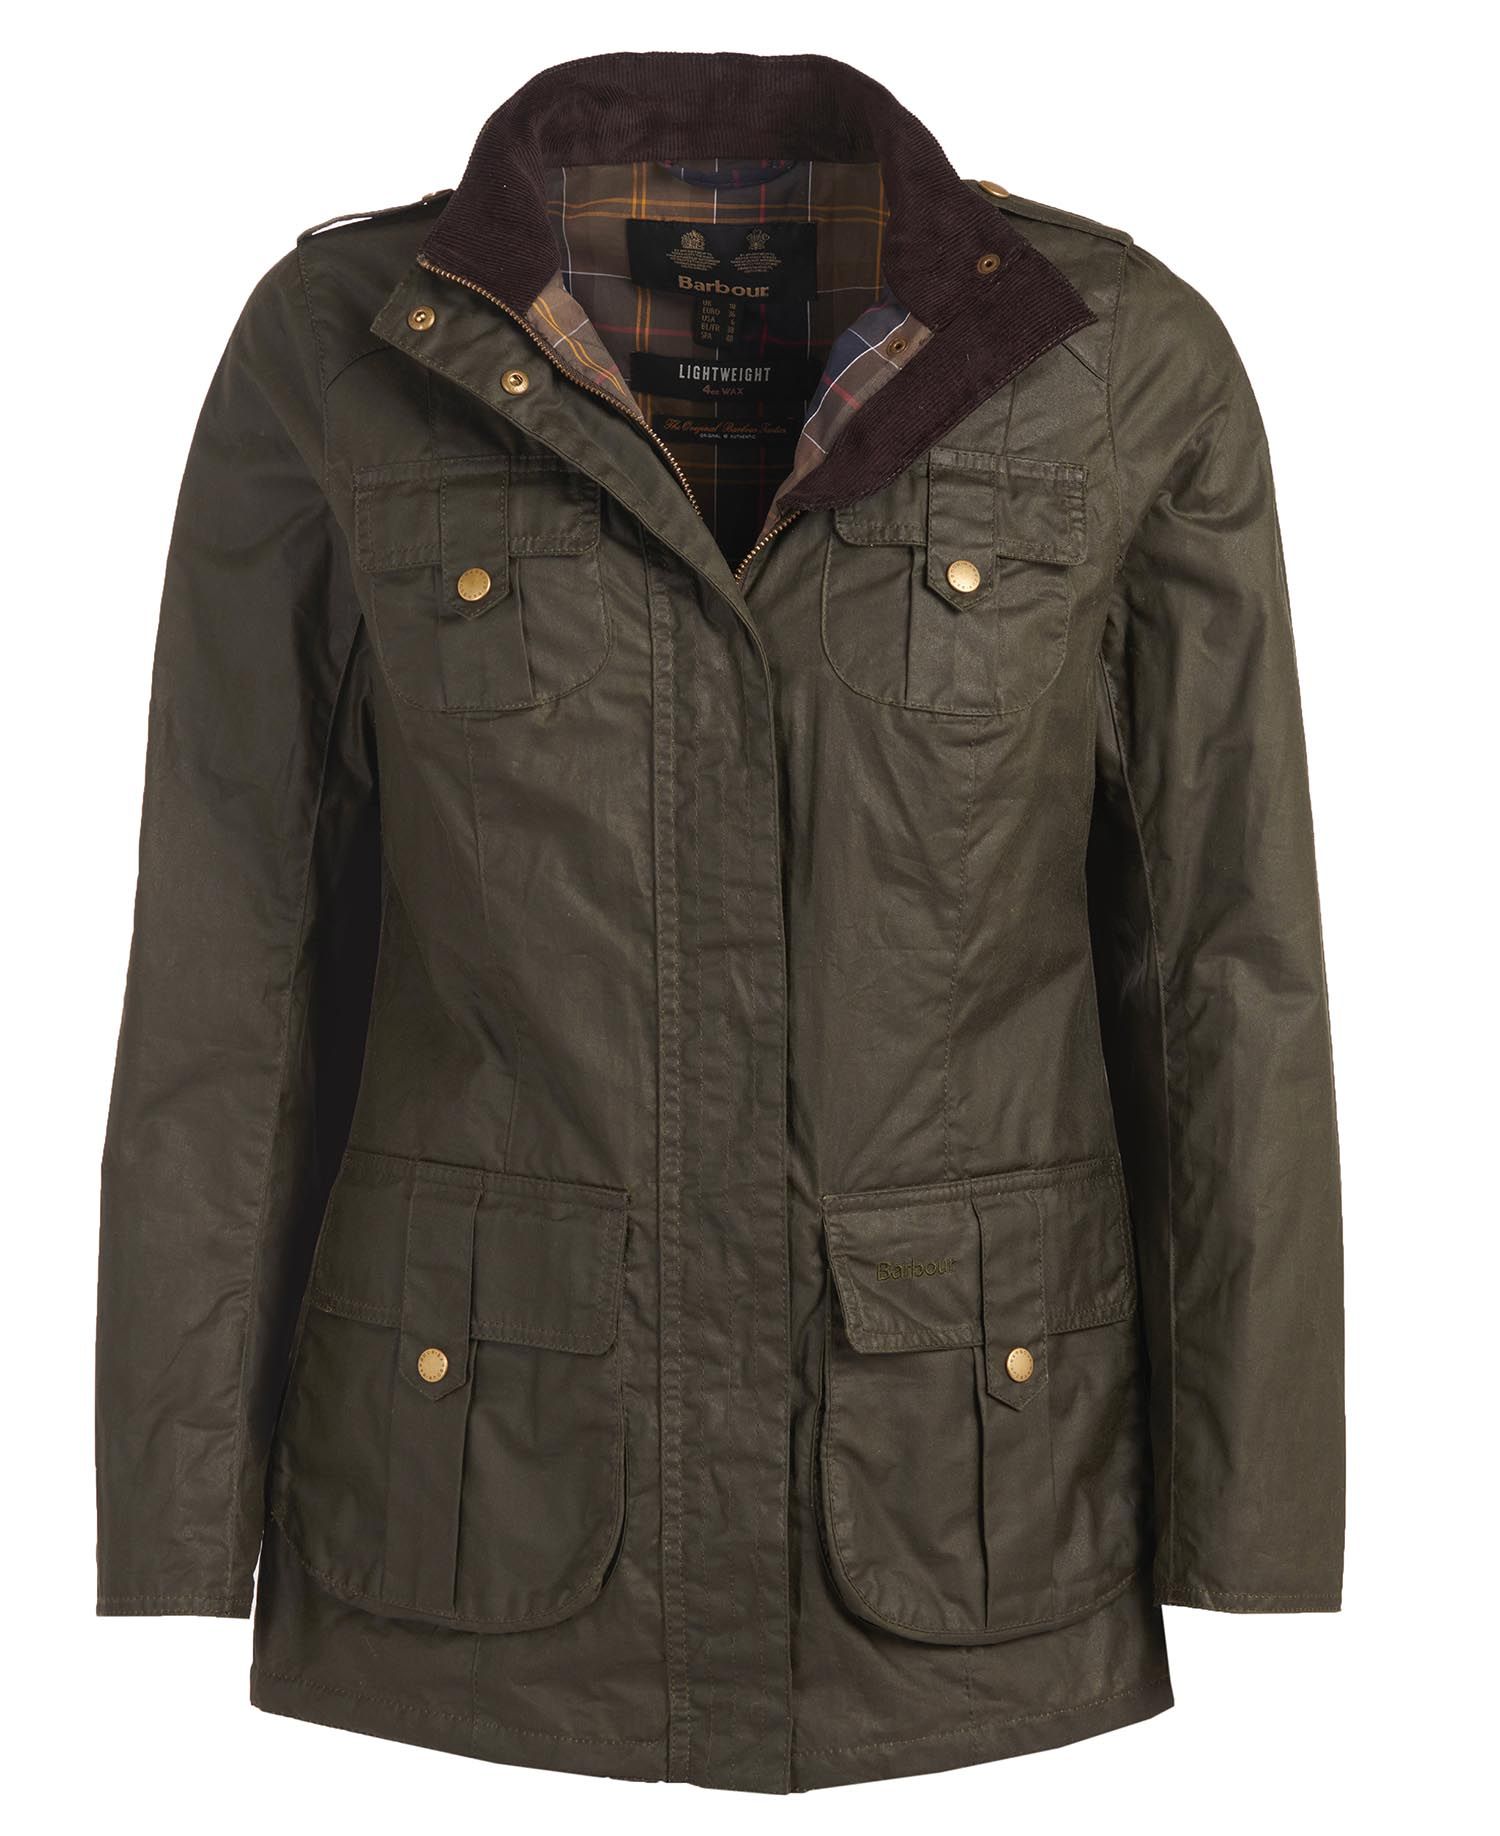 Barbour Lightweight Defence Waxed Cotton Jacket in Olive | Barbour